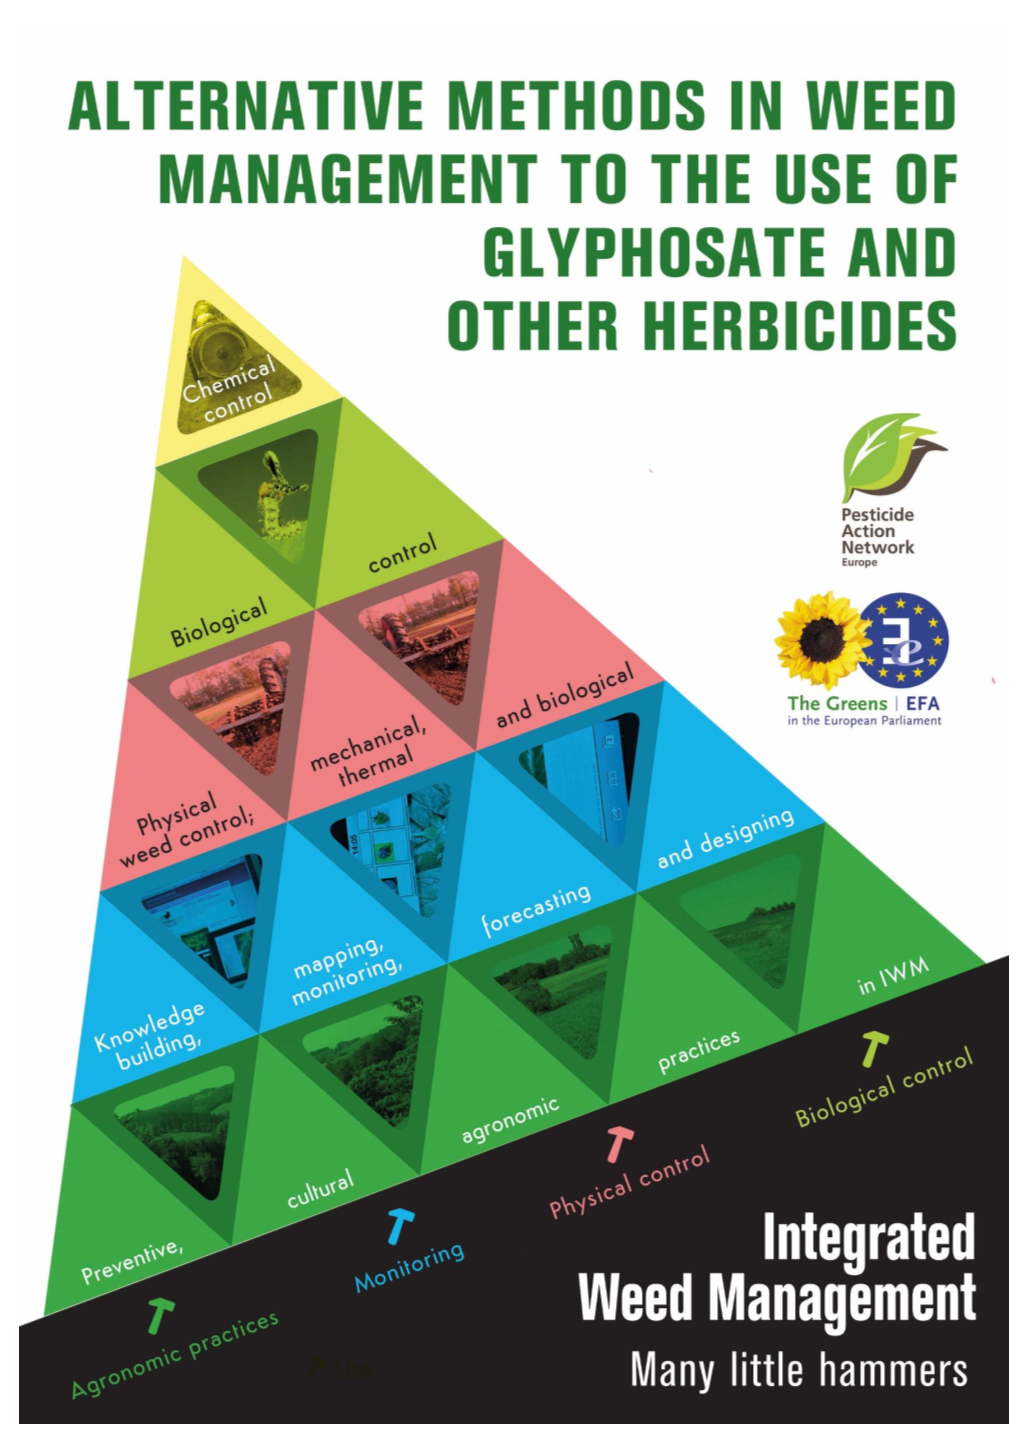 Alternatives to Herbicide Use in Weed Management – the Case of Glyphosate